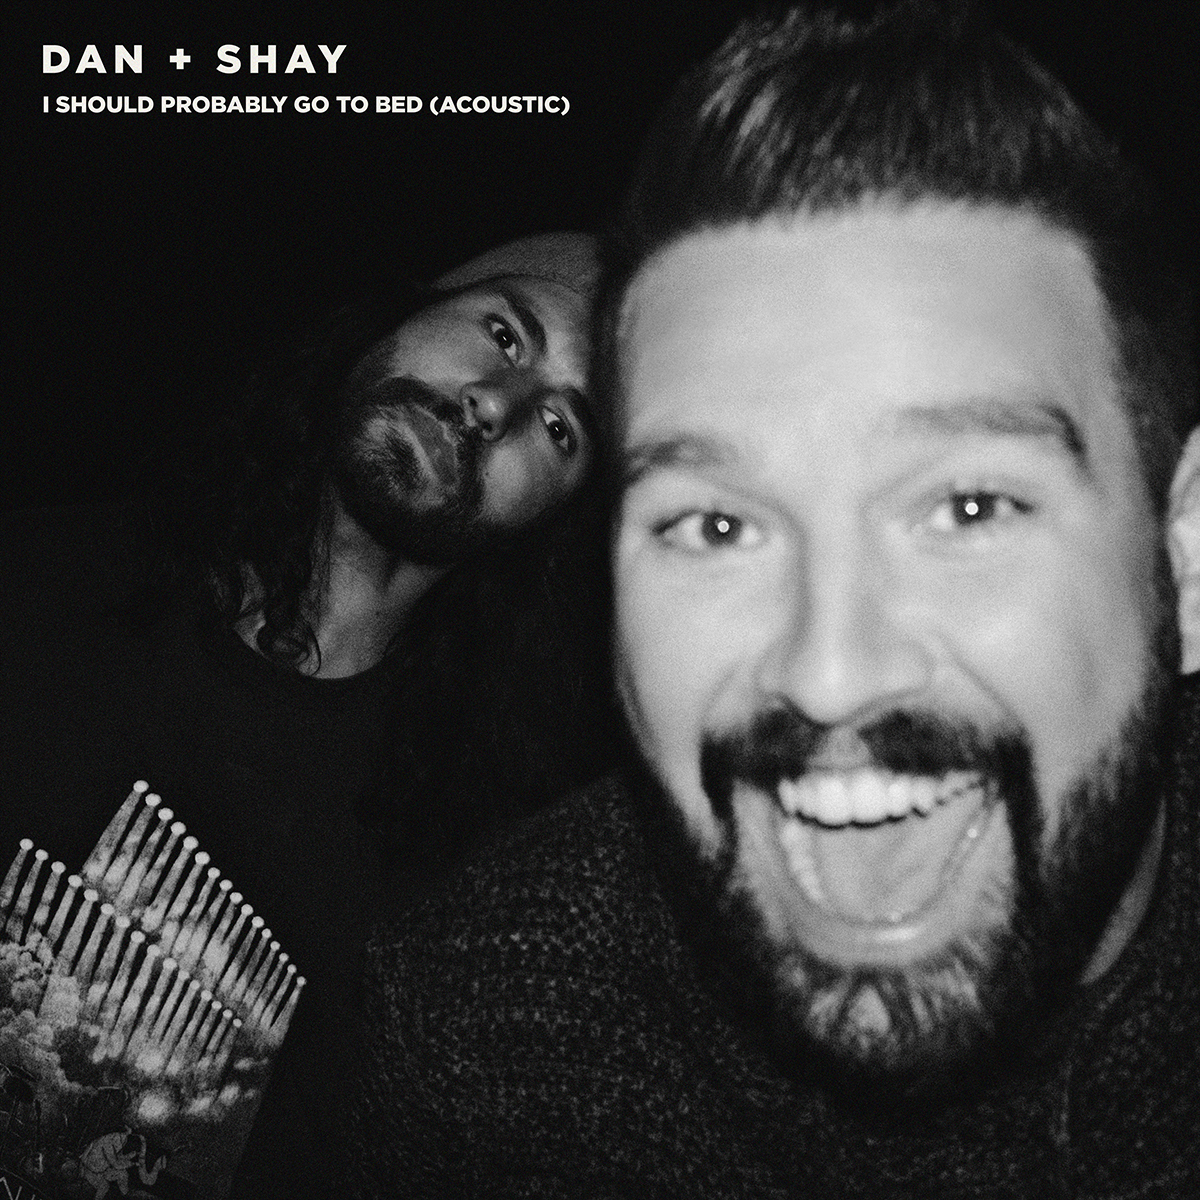 DAN + SHAY GO ACOUSTIC WITH "I SHOULD PROBABLY GO TO BED"